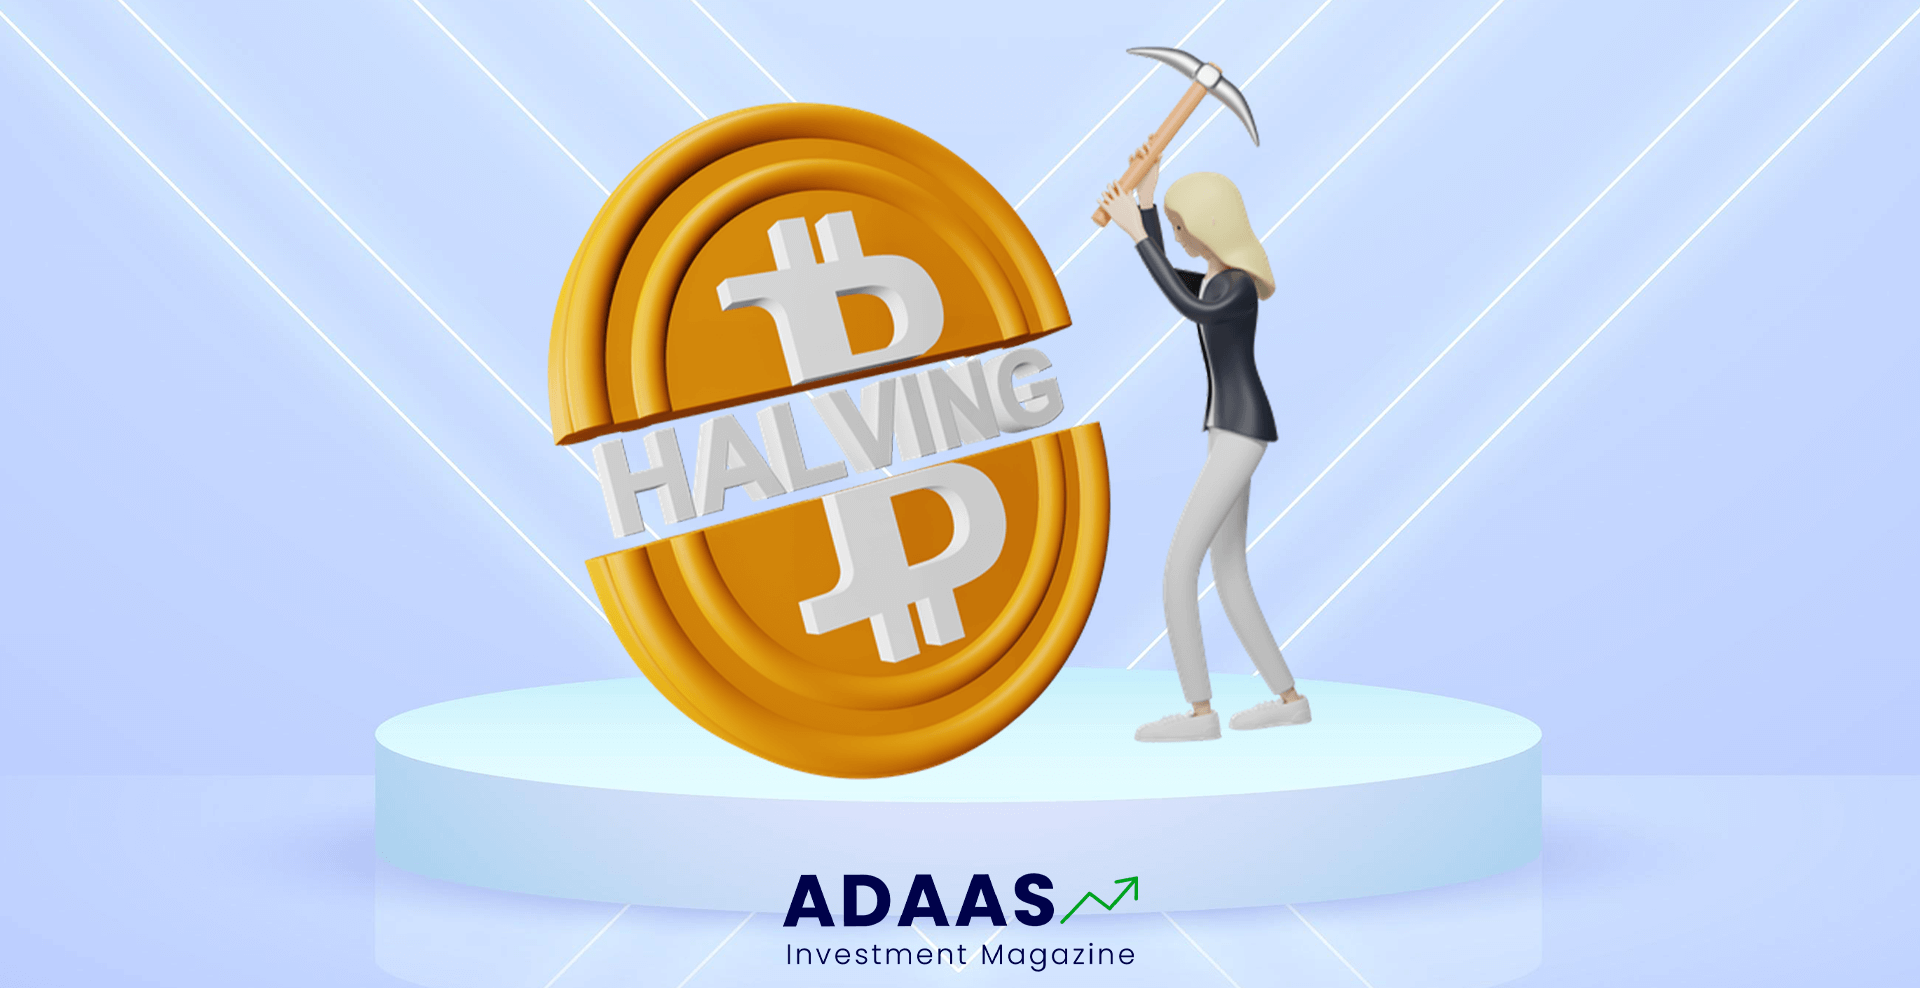 What Is Bitcoin Halving